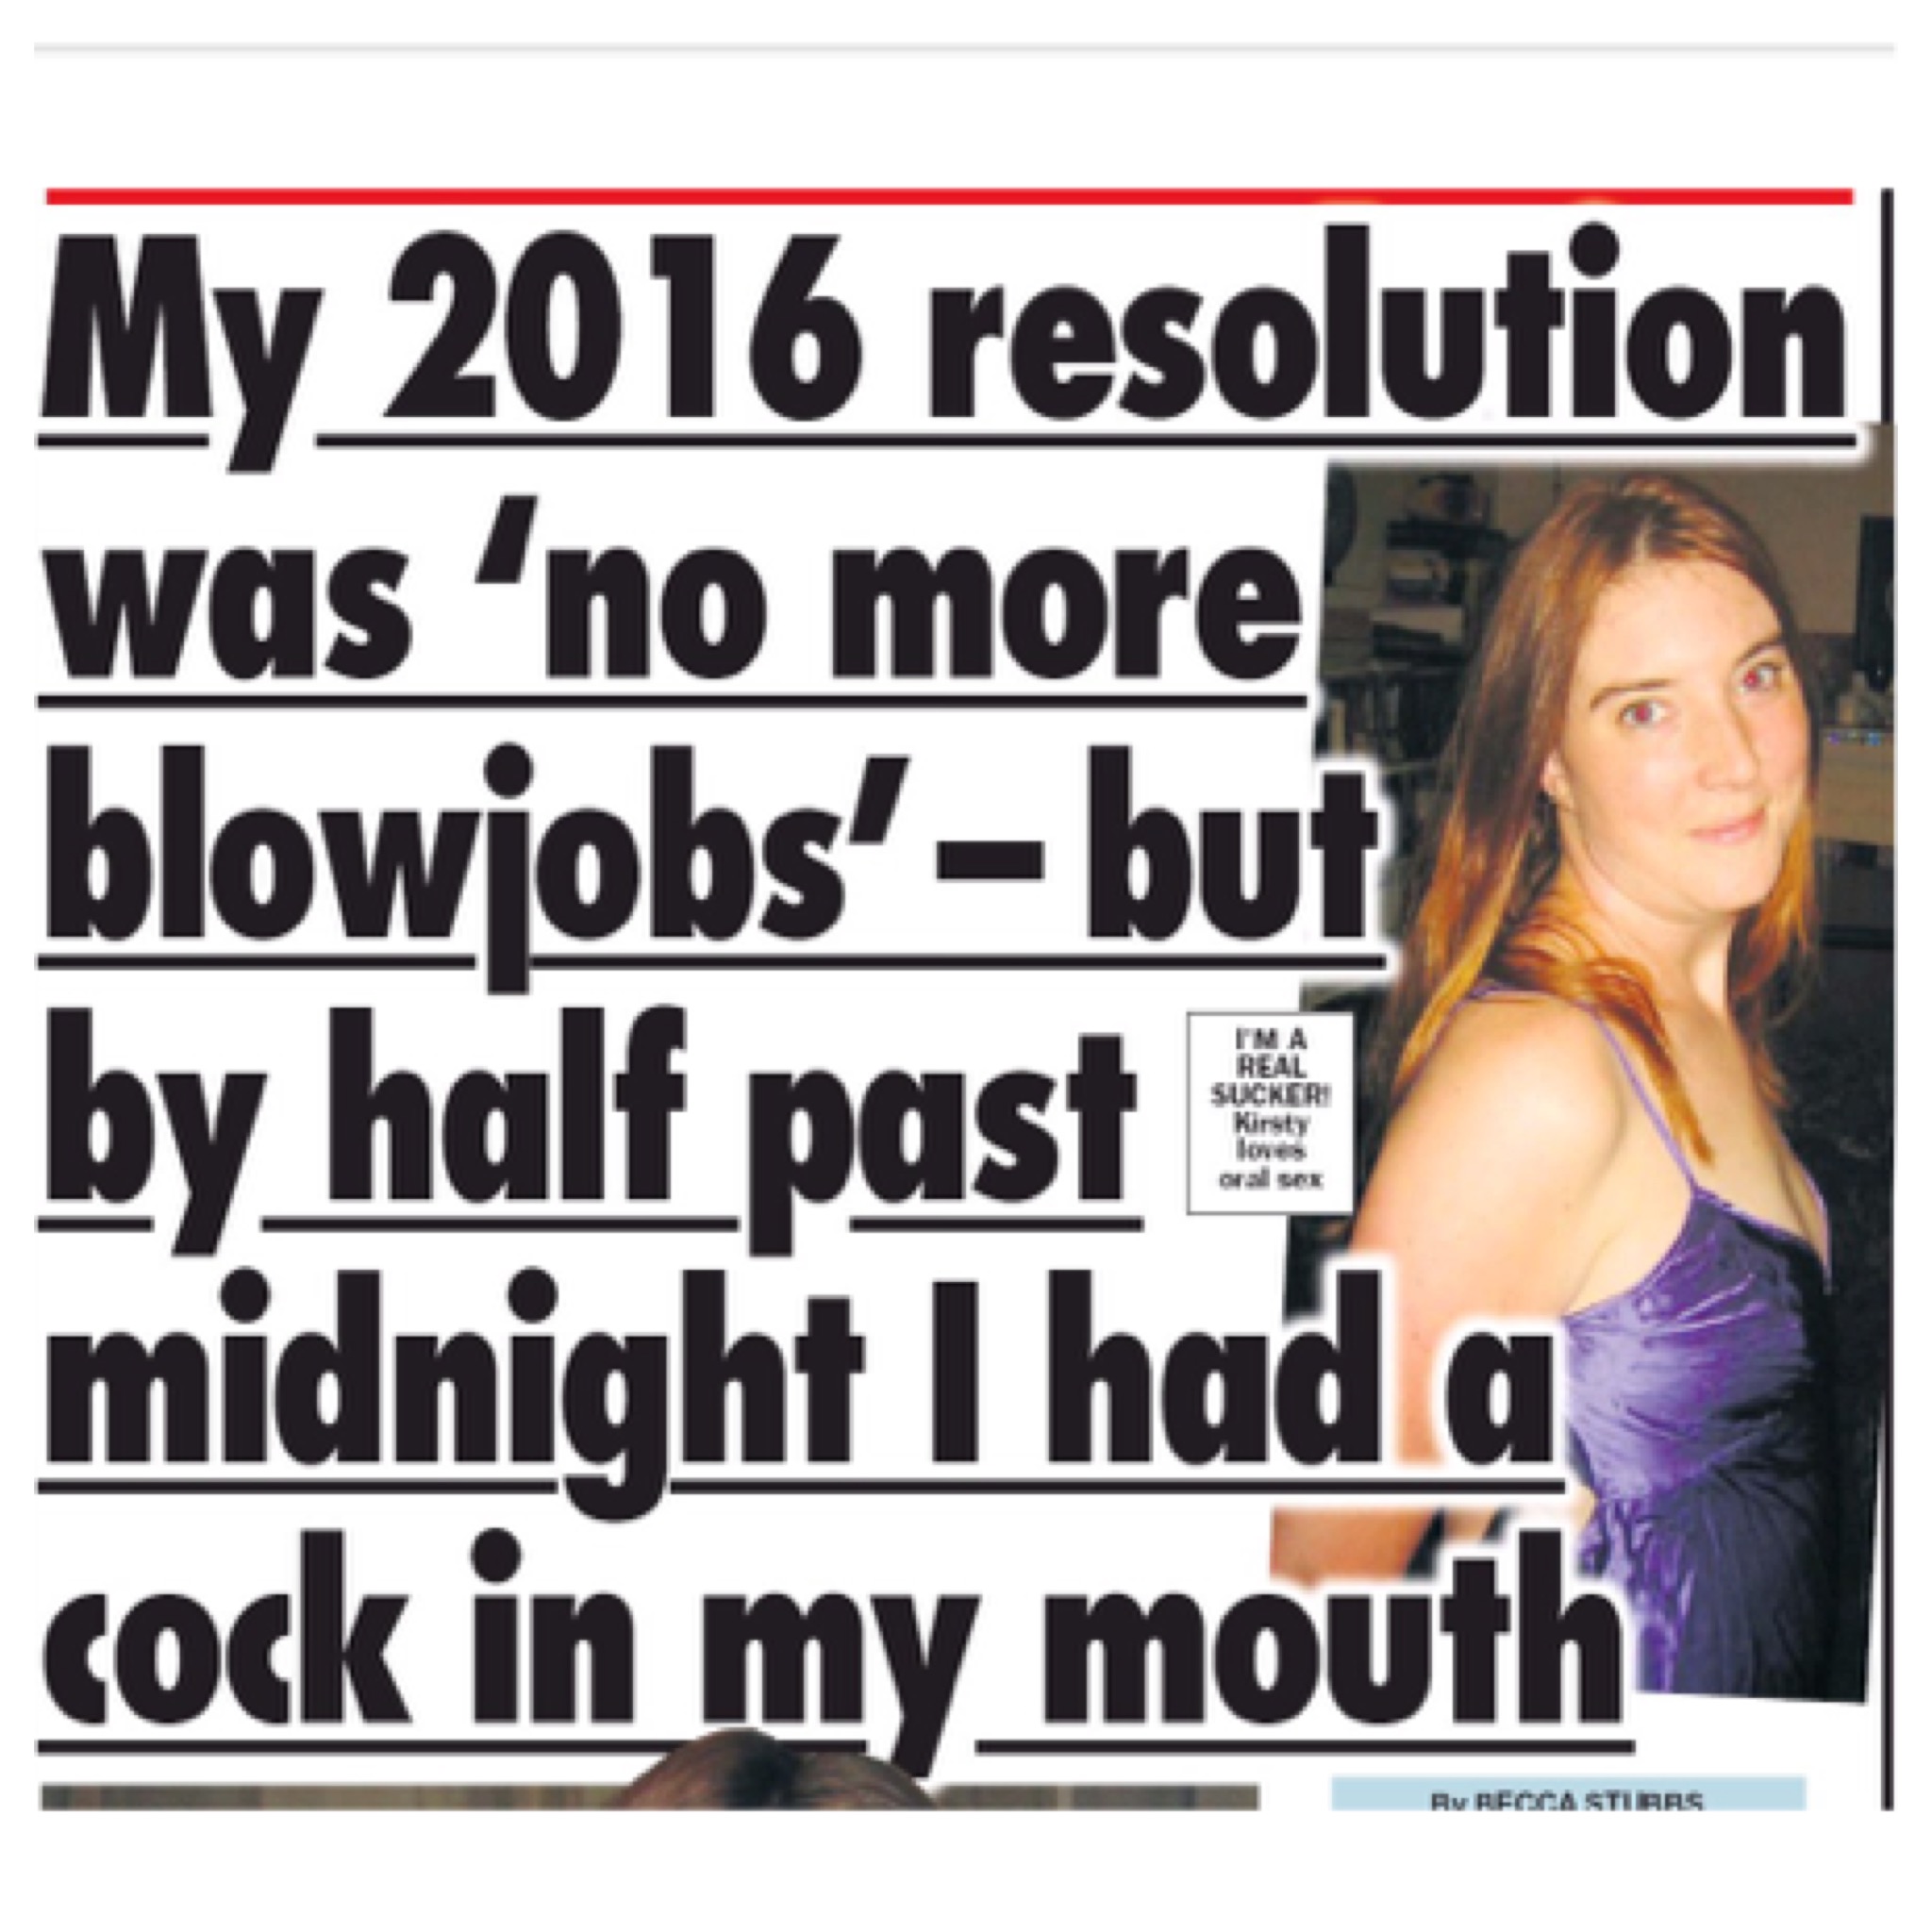 Quitting Blow Jobs A Difficult New Years Resolution For UK Woman to Keep!  pic